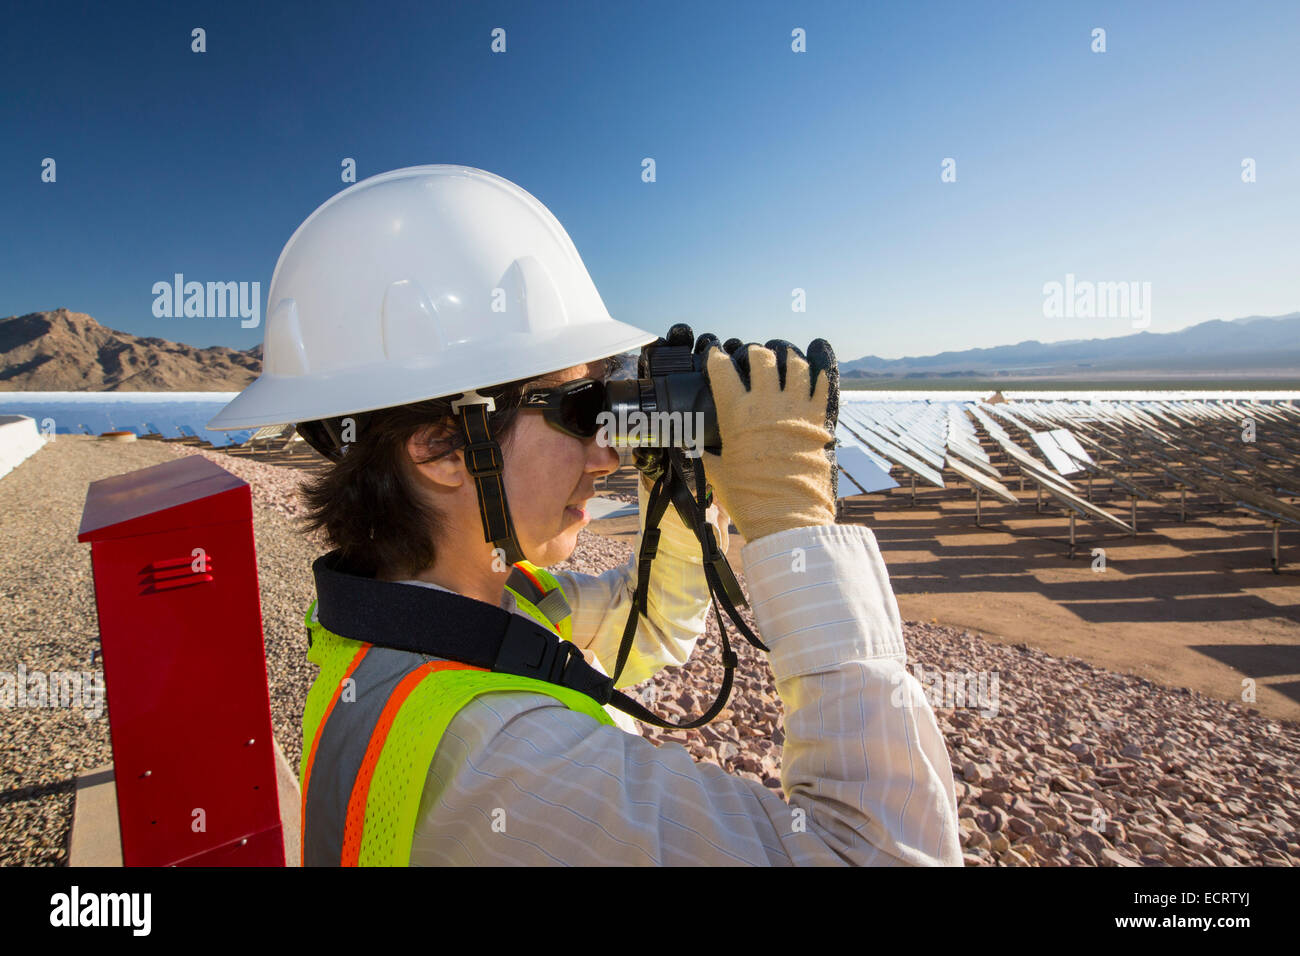 A biologist checking for birds flying too close to the solar tower at Ivanpah, the world's largest solar thermal power station, Stock Photo